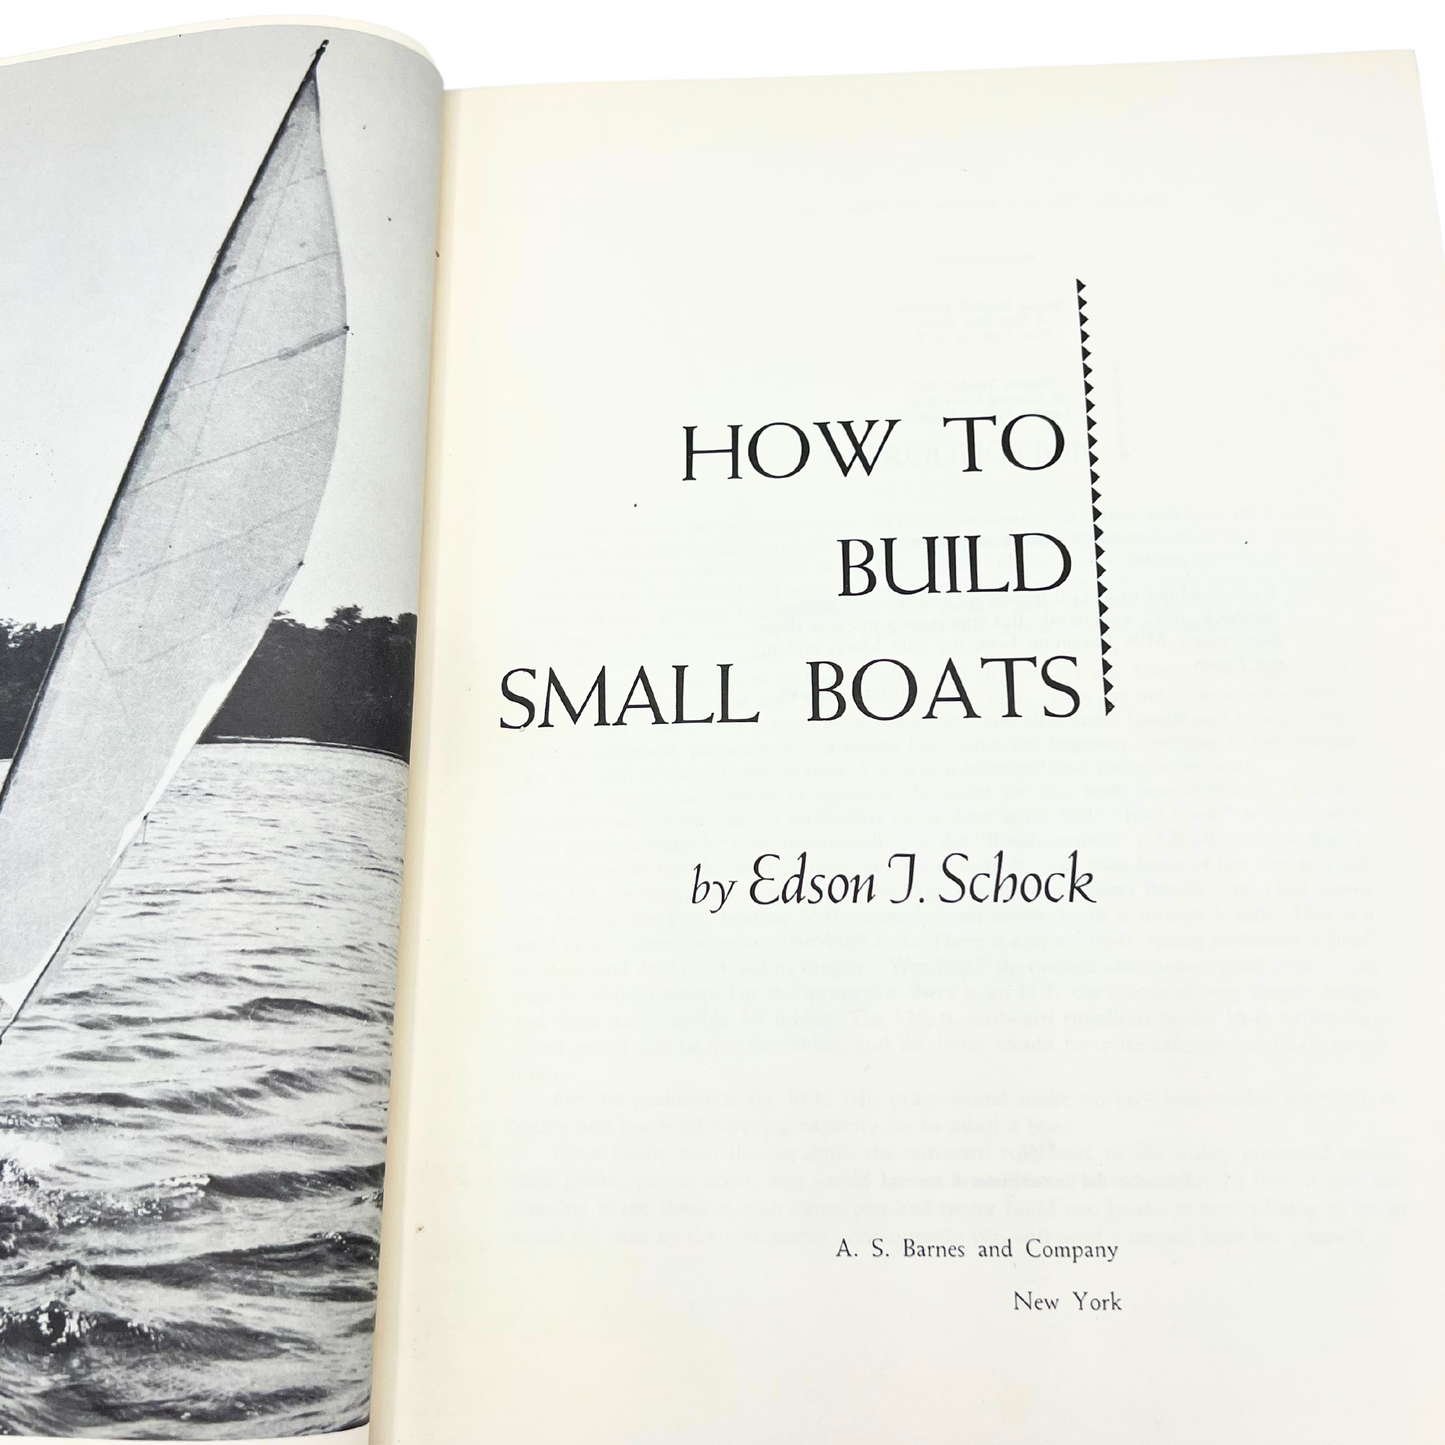 1952 book: How to Build Small Boats